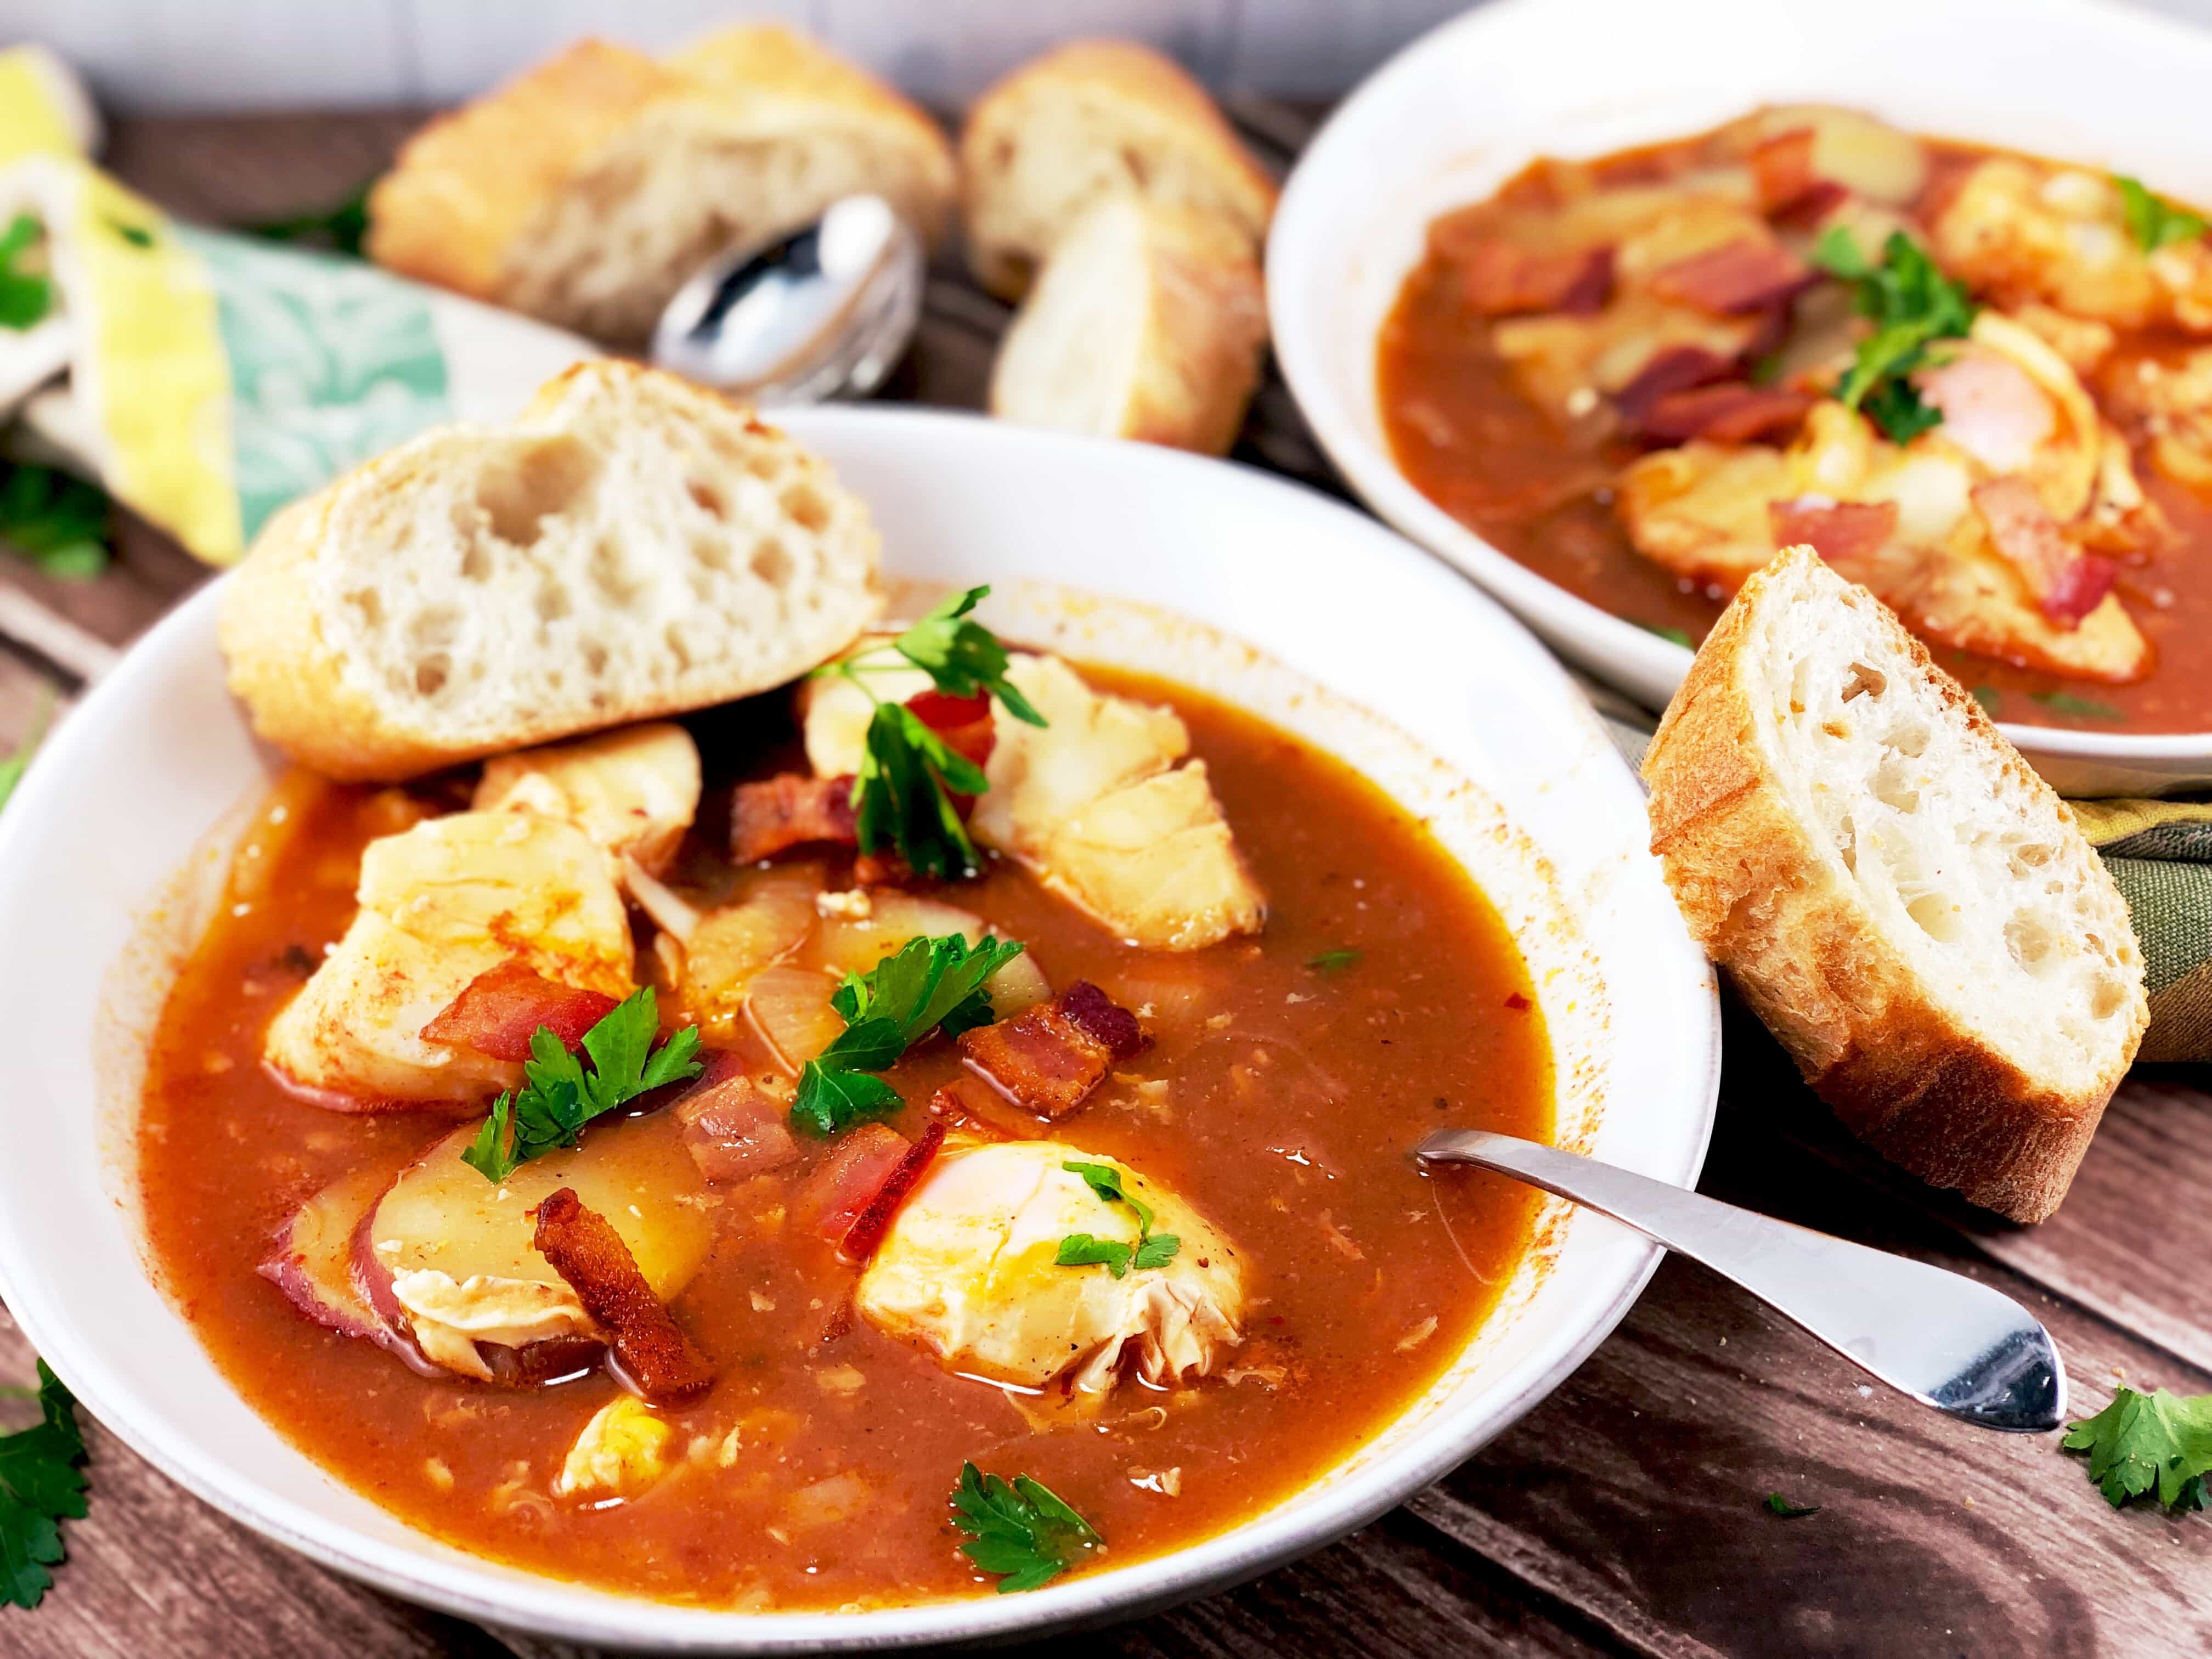 North Carolina Fish Stew with egg, whitefish and bacon